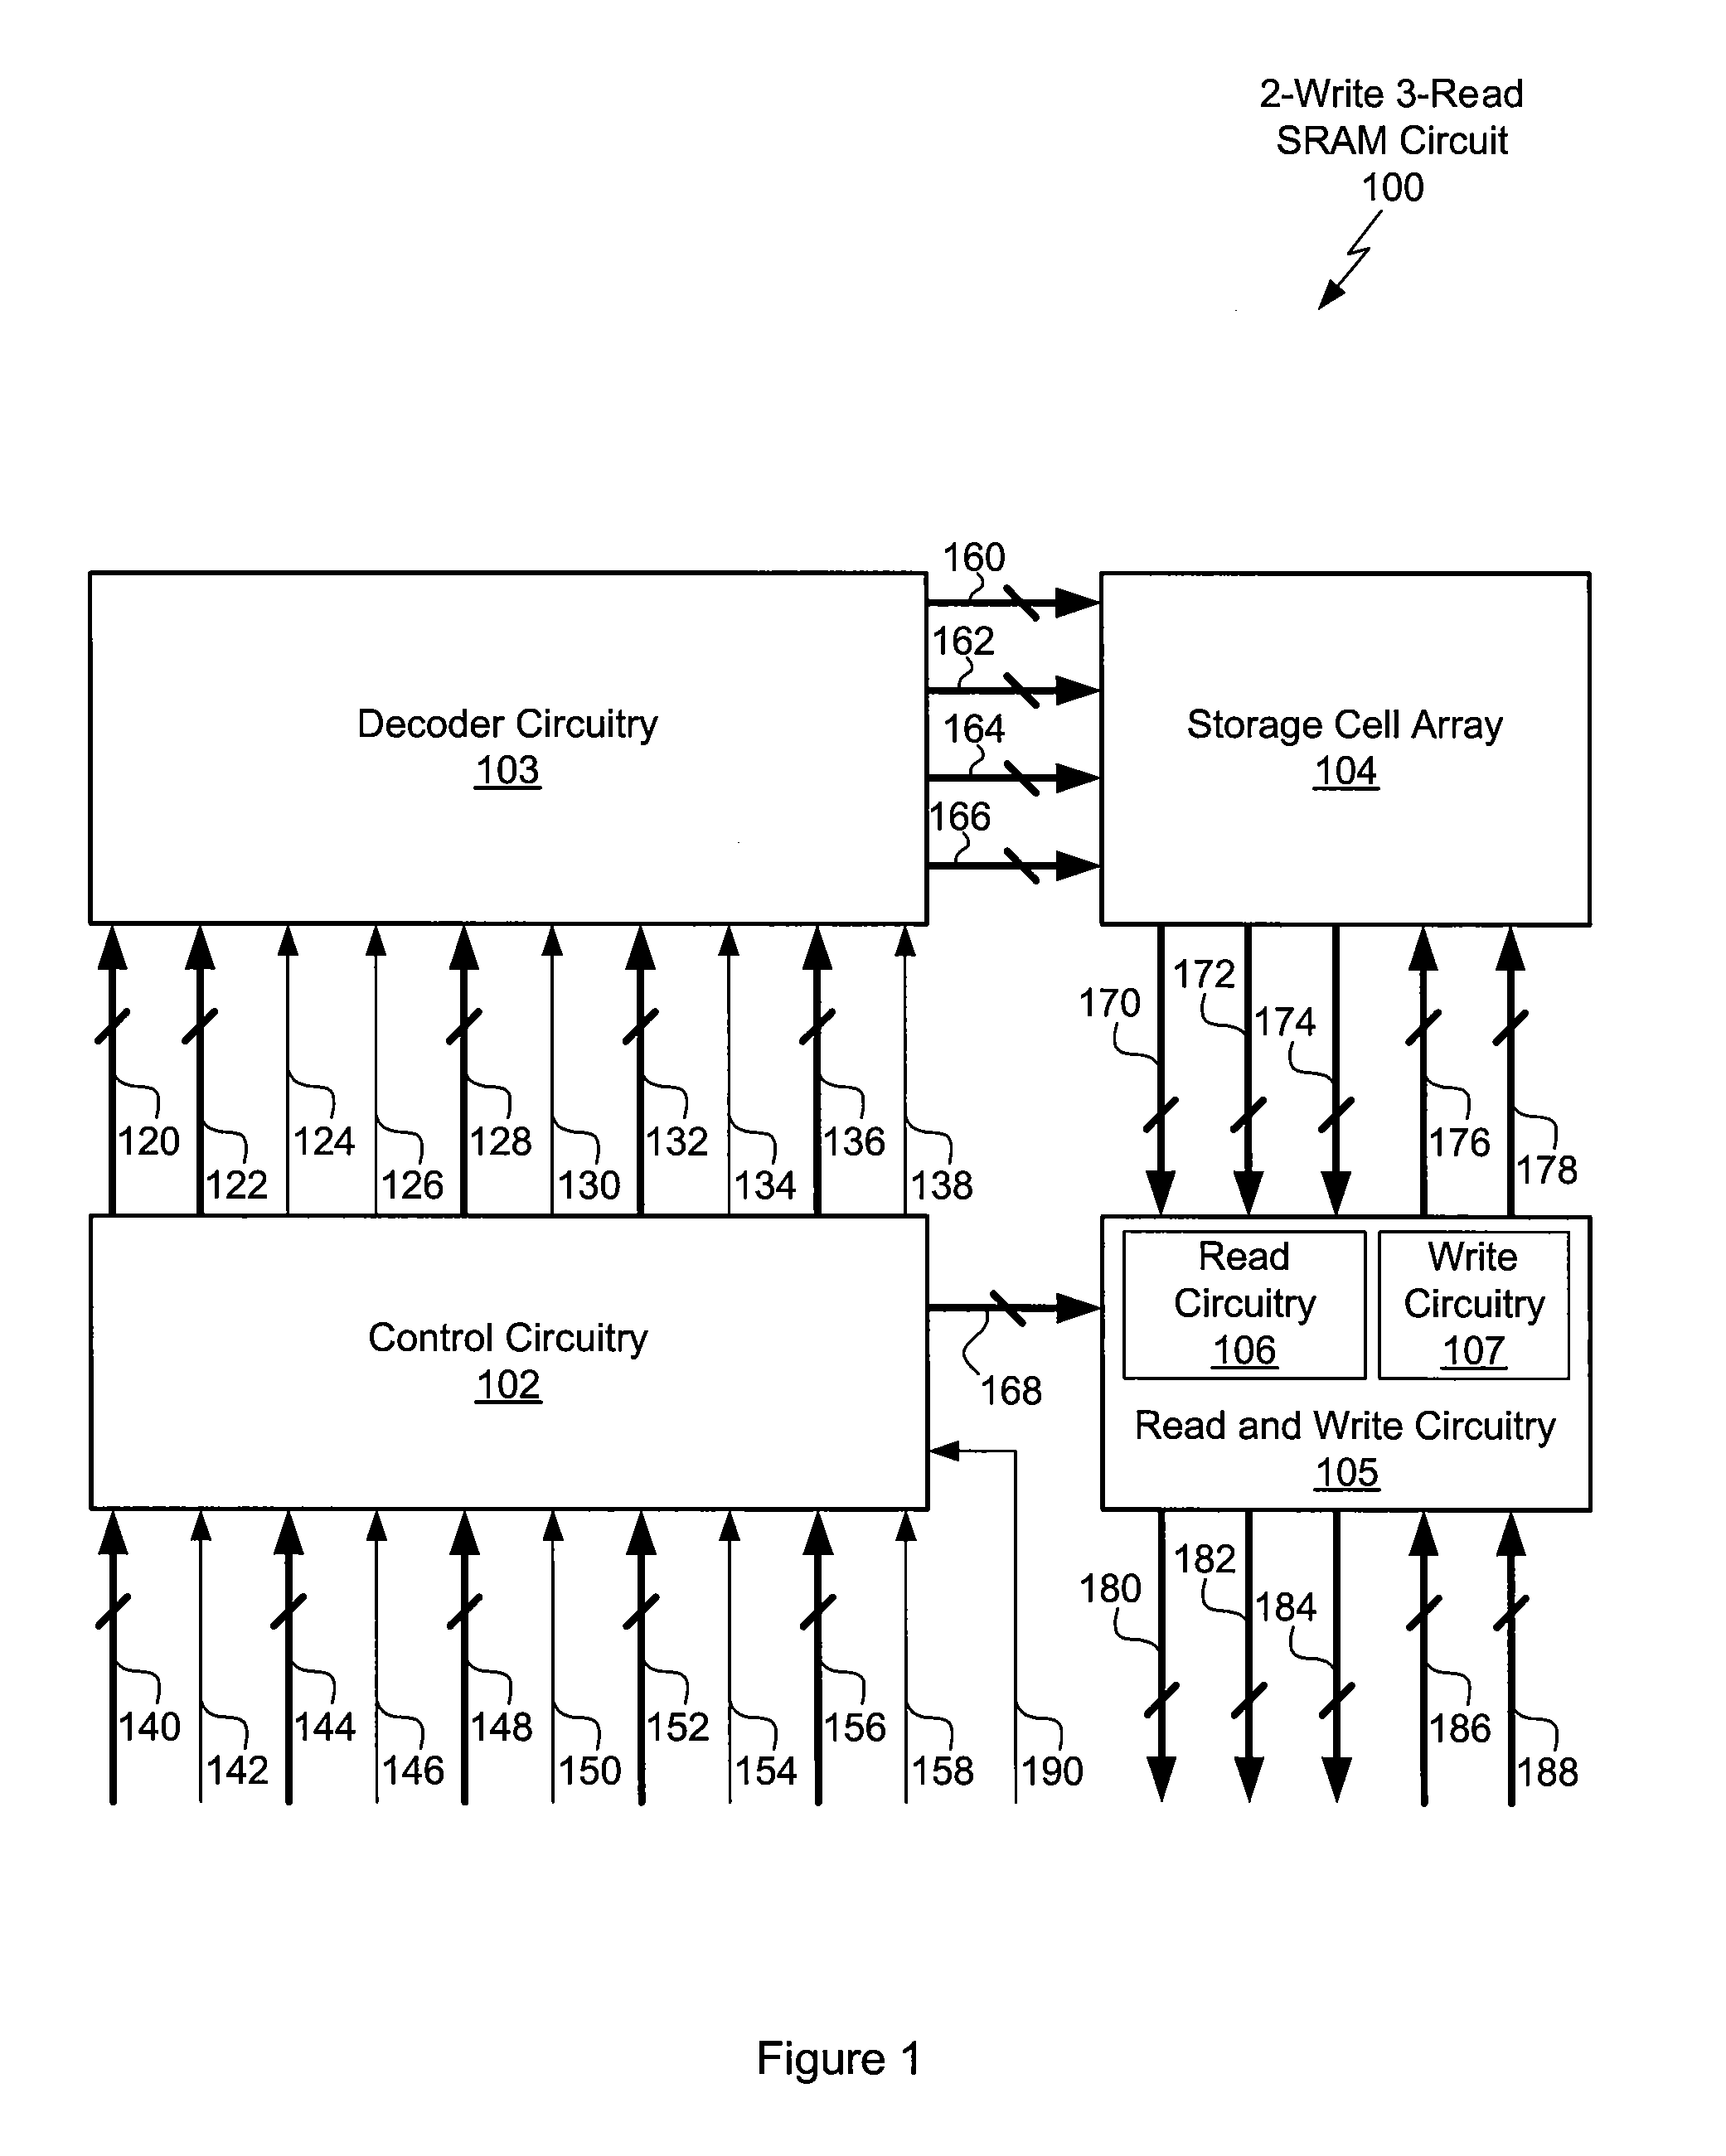 2-write 3-read SRAM design using a 12-T storage cell